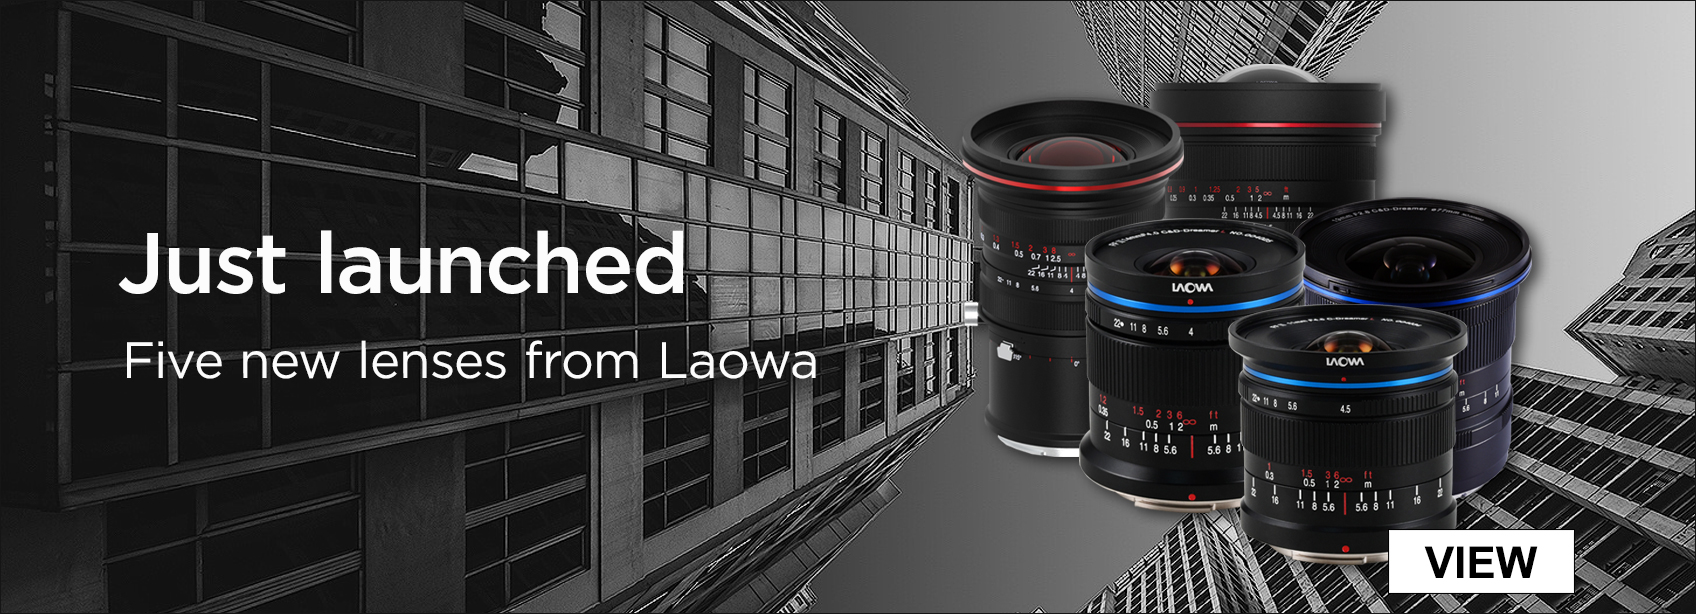 Just Launched Five new lenses from Laowa